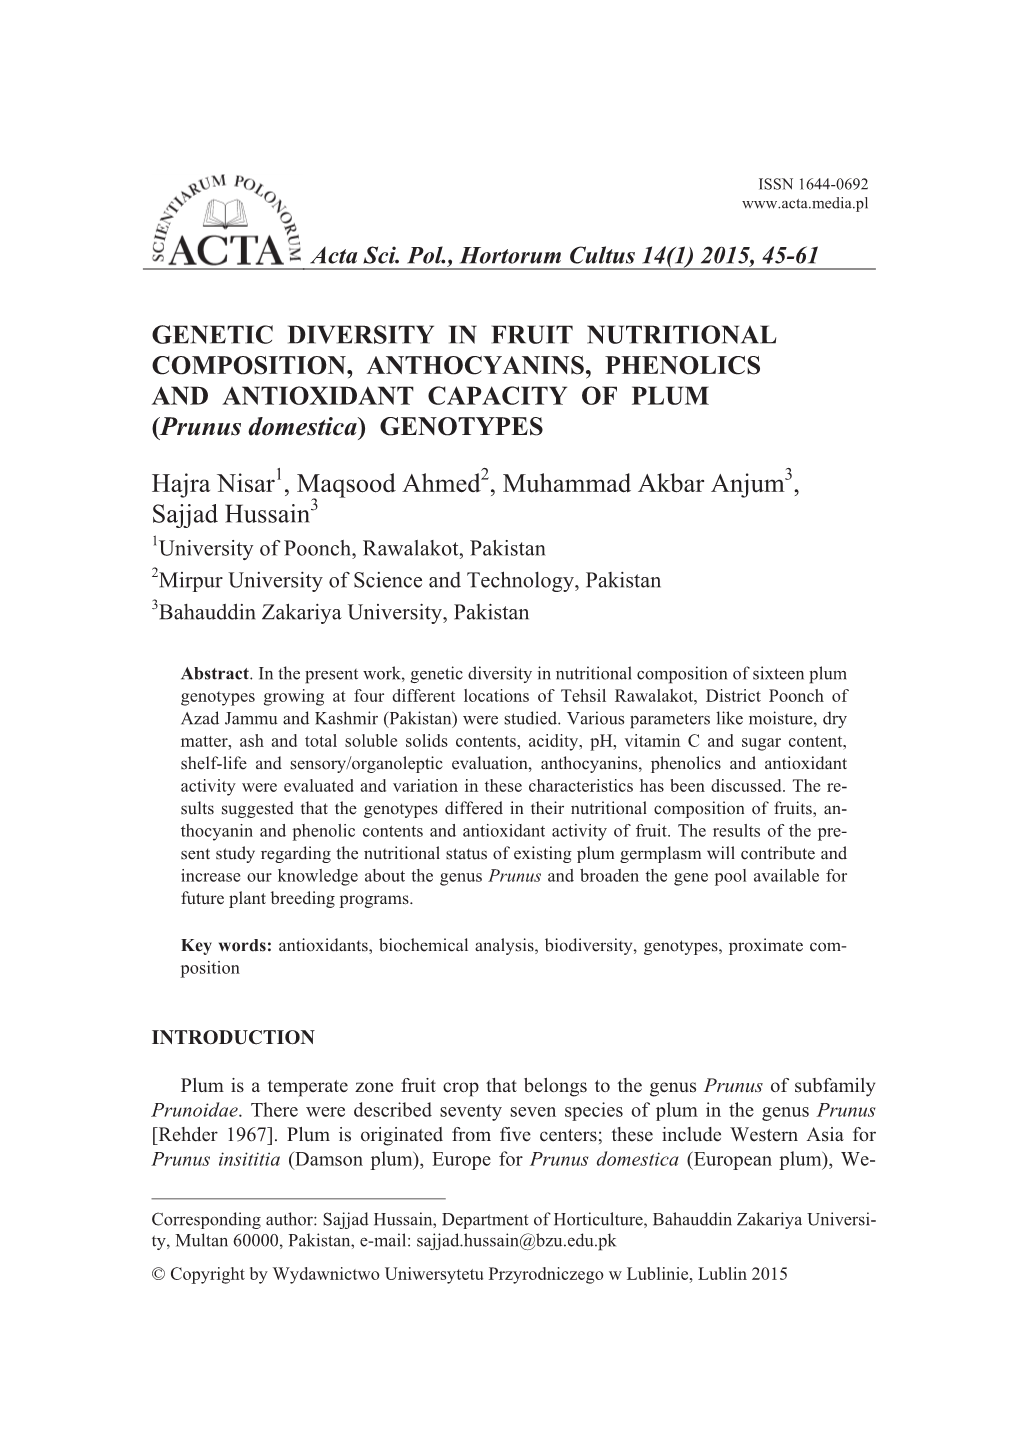 GENETIC DIVERSITY in FRUIT NUTRITIONAL COMPOSITION, ANTHOCYANINS, PHENOLICS and ANTIOXIDANT CAPACITY of PLUM (Prunus Domestica) GENOTYPES